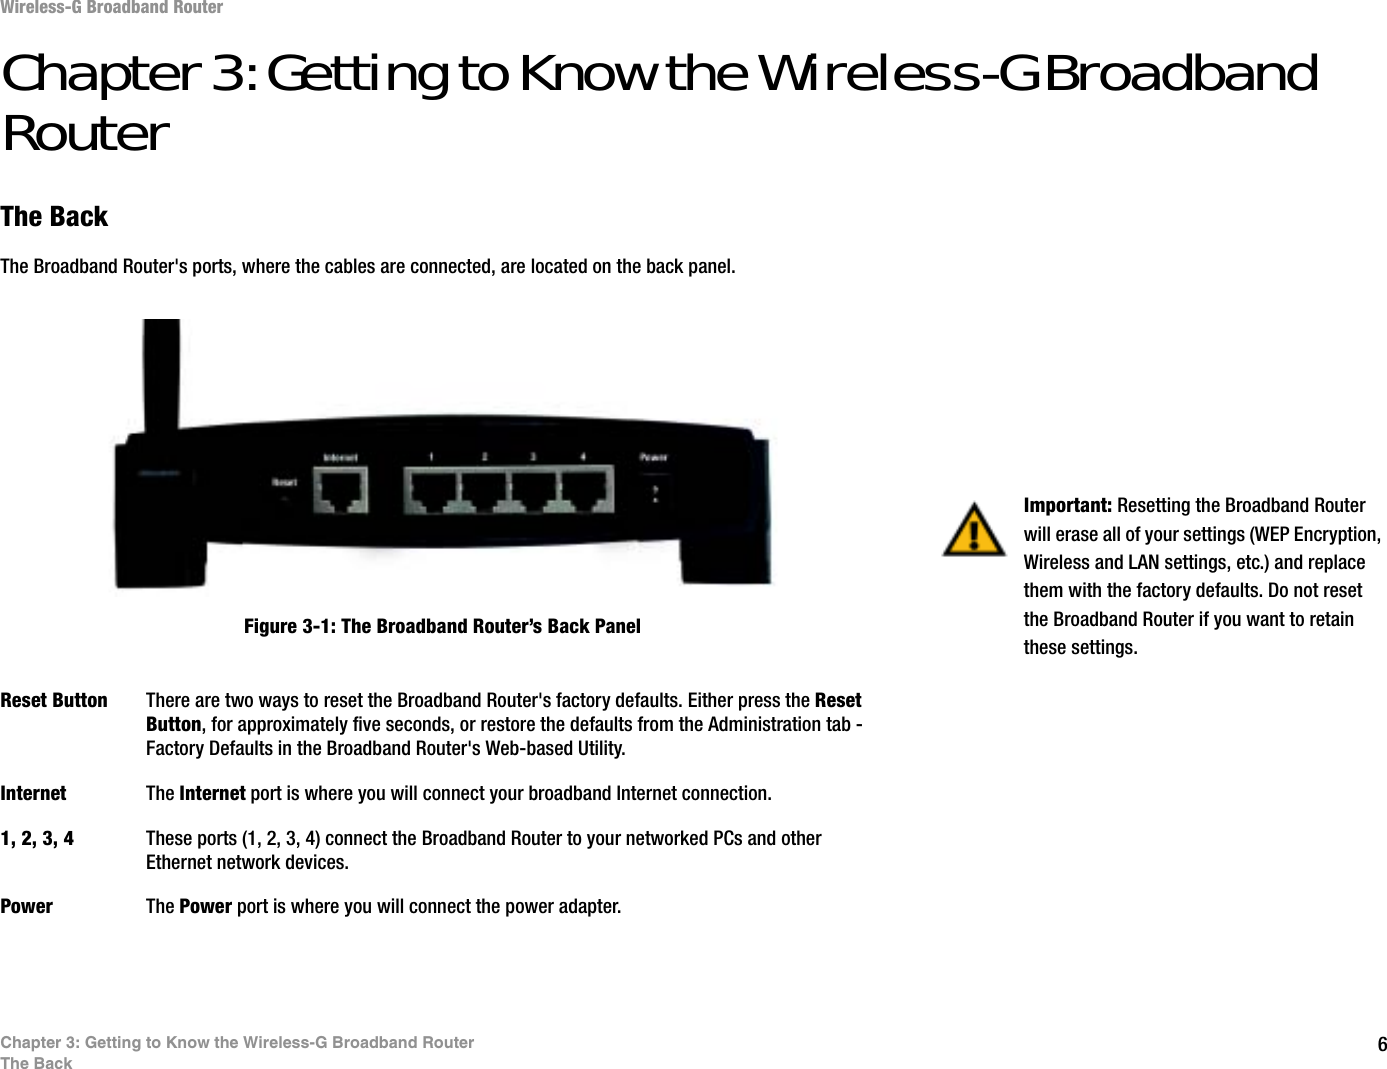 6Chapter 3: Getting to Know the Wireless-G Broadband RouterThe BackWireless-G Broadband RouterChapter 3: Getting to Know the Wireless-G Broadband RouterThe BackThe Broadband Router&apos;s ports, where the cables are connected, are located on the back panel.Reset Button There are two ways to reset the Broadband Router&apos;s factory defaults. Either press the ResetButton, for approximately five seconds, or restore the defaults from the Administration tab - Factory Defaults in the Broadband Router&apos;s Web-based Utility.Internet The Internet port is where you will connect your broadband Internet connection.1, 2, 3, 4 These ports (1, 2, 3, 4) connect the Broadband Router to your networked PCs and other Ethernet network devices.Power The Power port is where you will connect the power adapter.Important: Resetting the Broadband Router will erase all of your settings (WEP Encryption, Wireless and LAN settings, etc.) and replace them with the factory defaults. Do not reset the Broadband Router if you want to retain these settings.Figure 3-1: The Broadband Router’s Back Panel